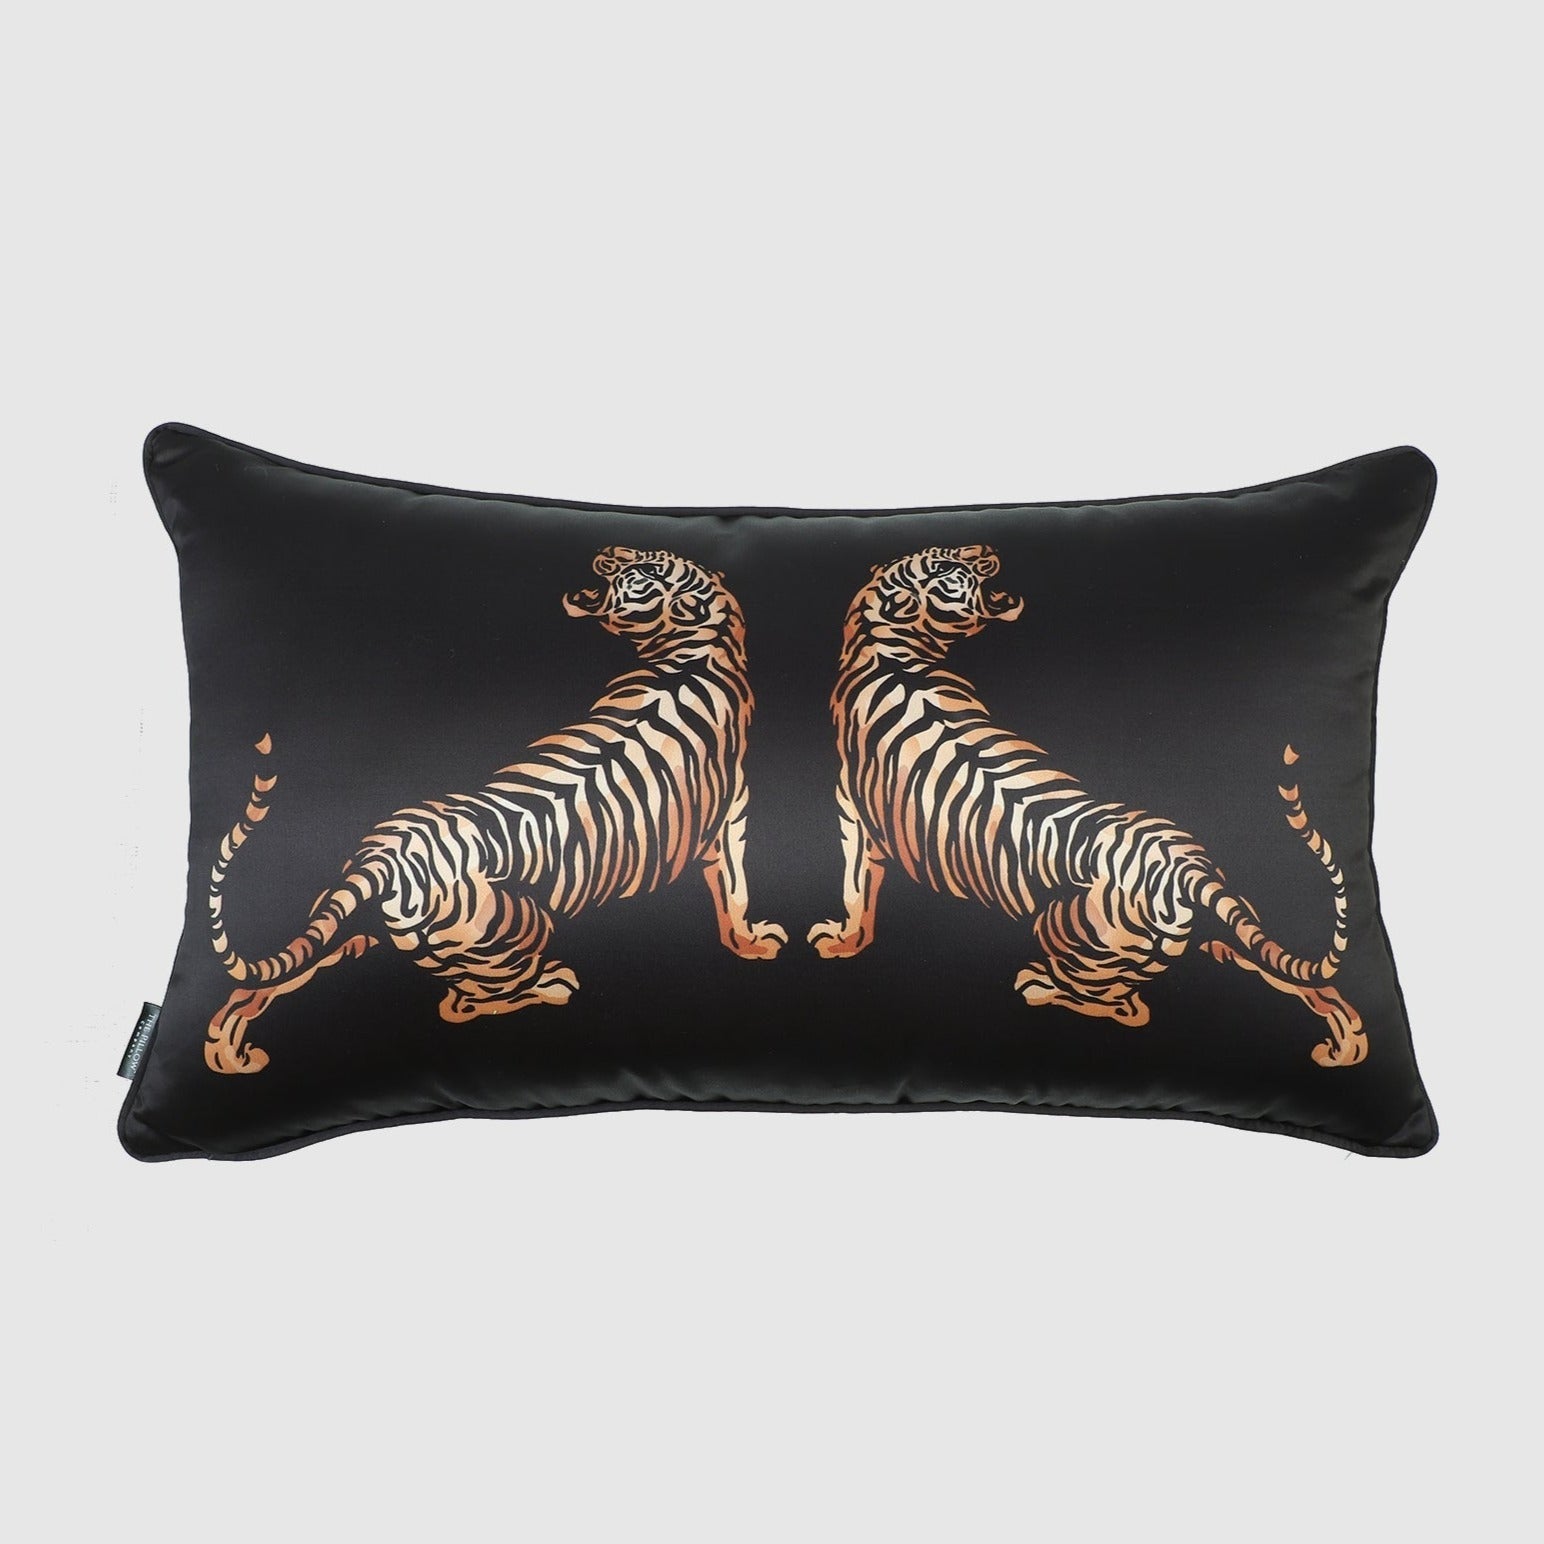 Exotic Roar Sateen Pillow Cover , Black - Pillow Covers